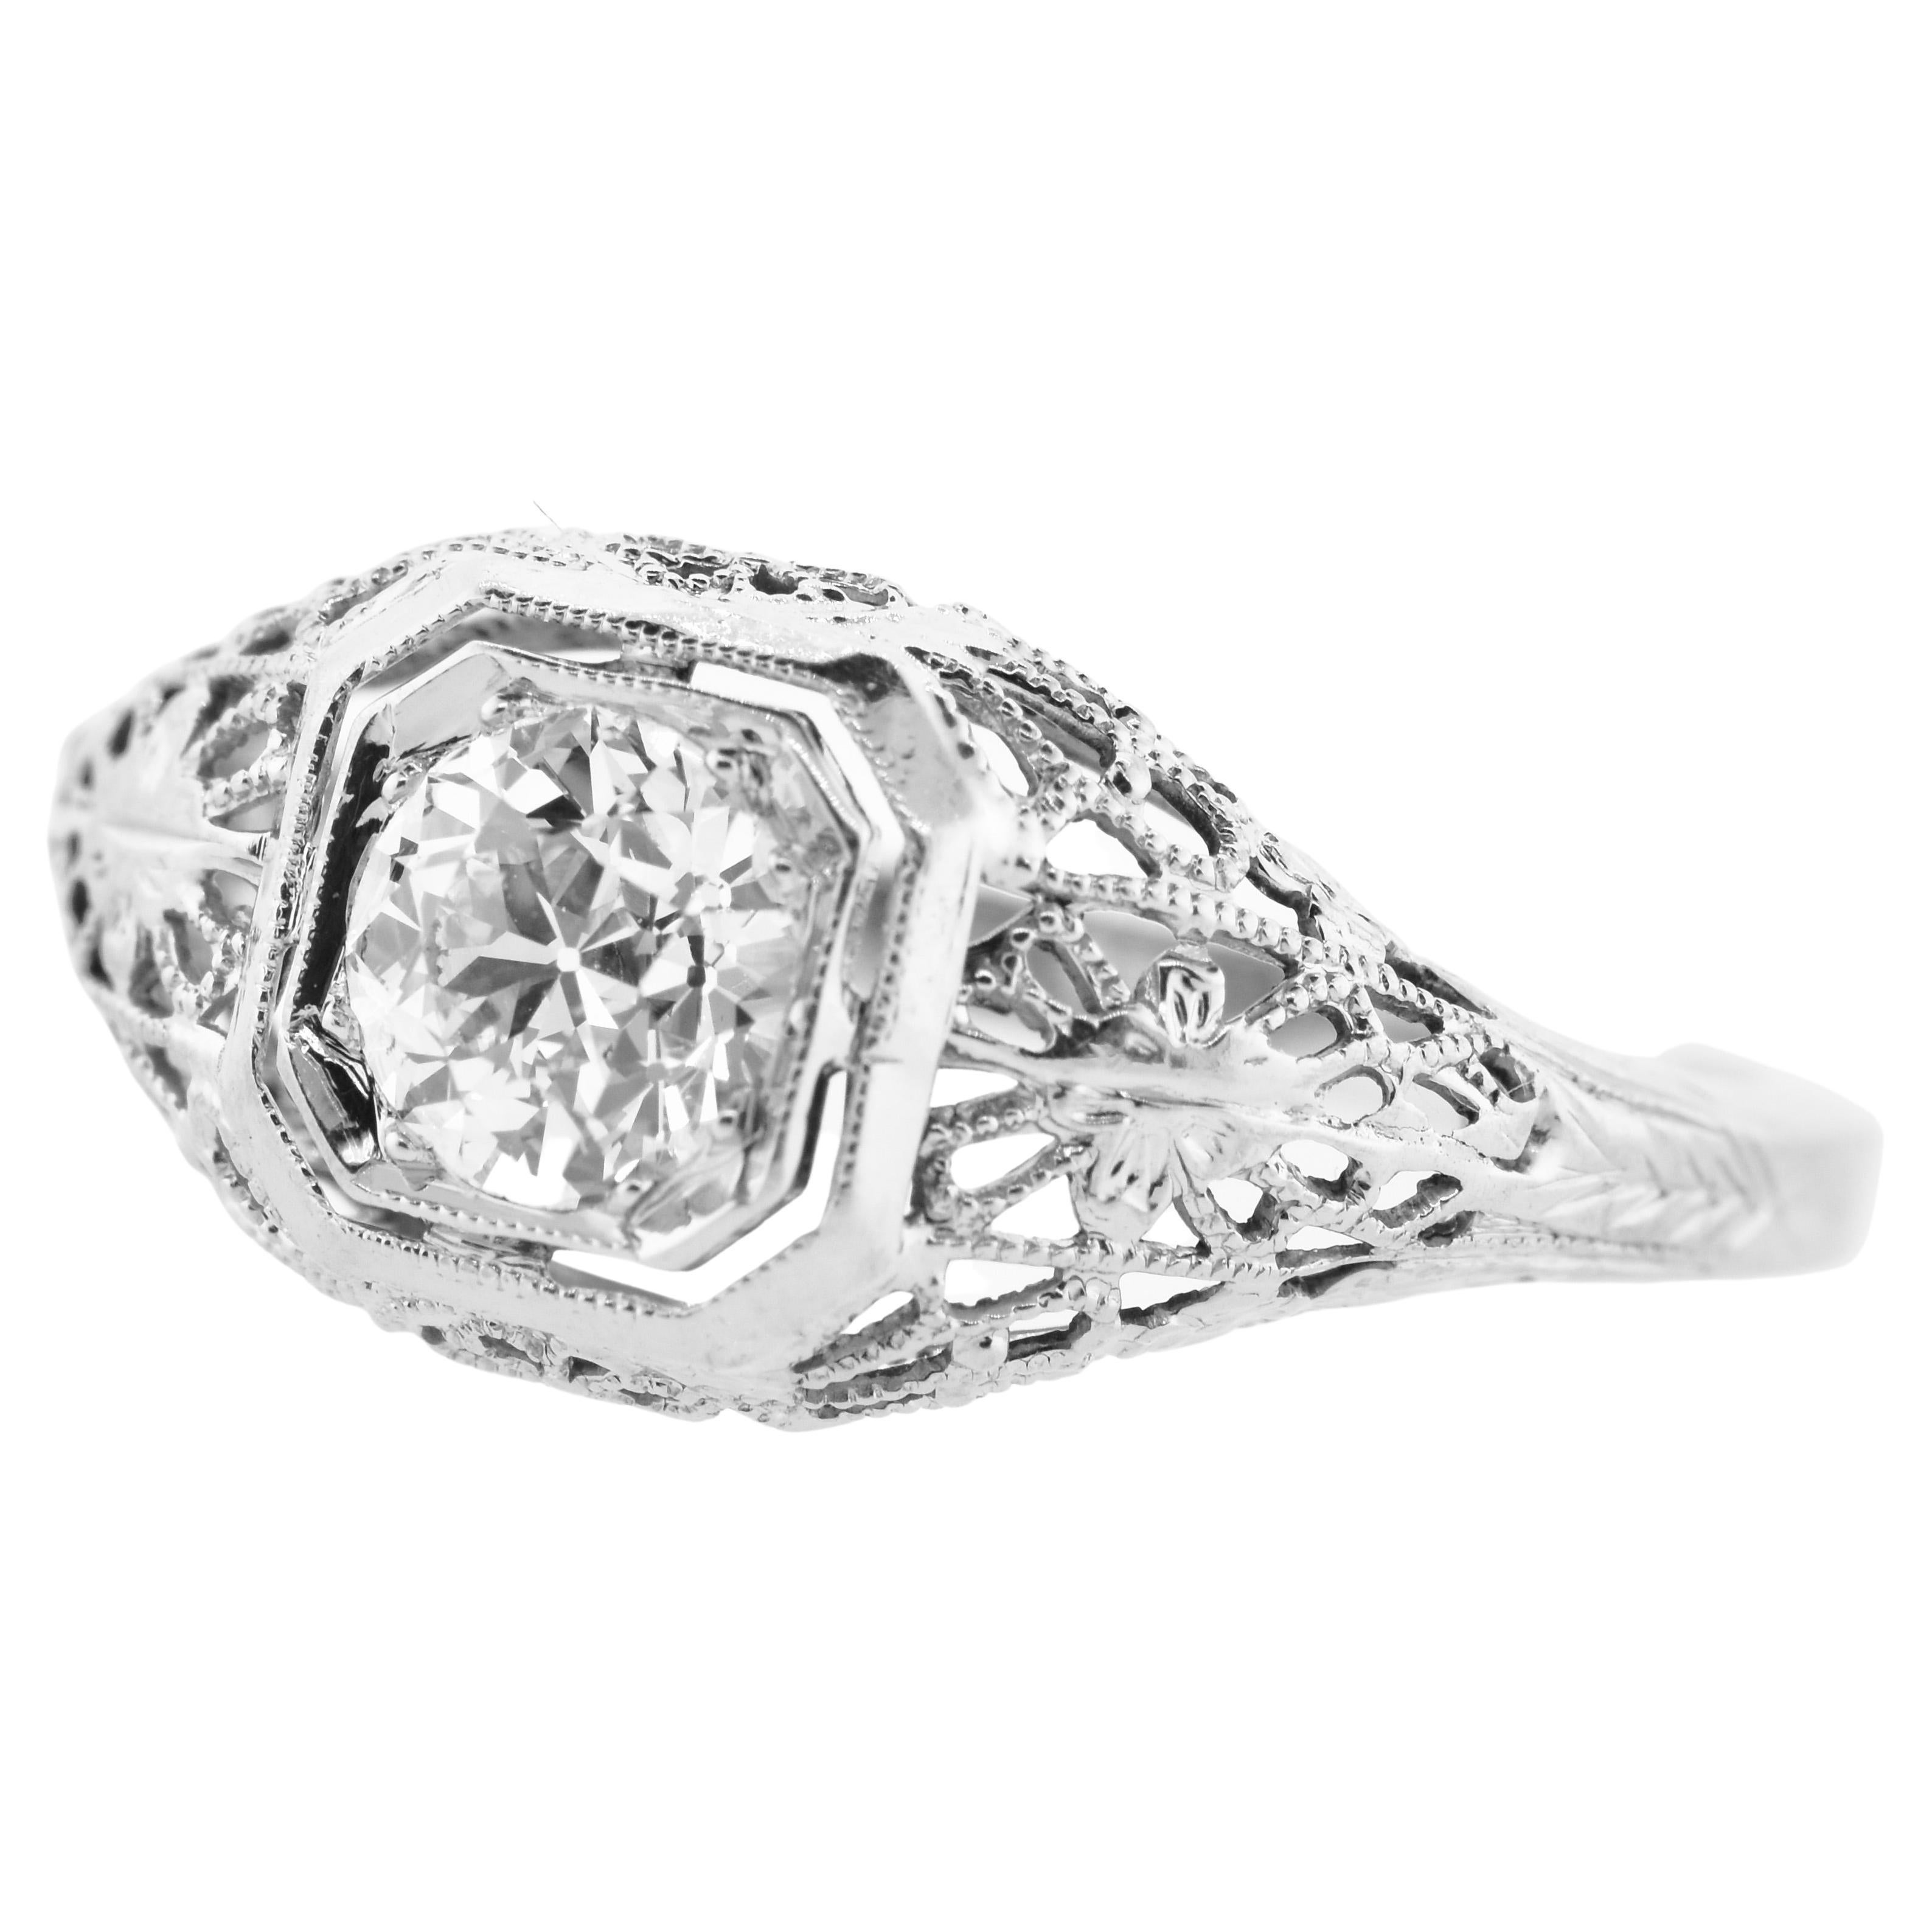 Antique filigree diamond 18K white gold ring.  The center European cut diamond weighs an estimated .65 cts.  It is near colorless (H/I) and very slightly included (VS).  This fine diamond is centered in a fine antique filigree 18K white gold ring. 